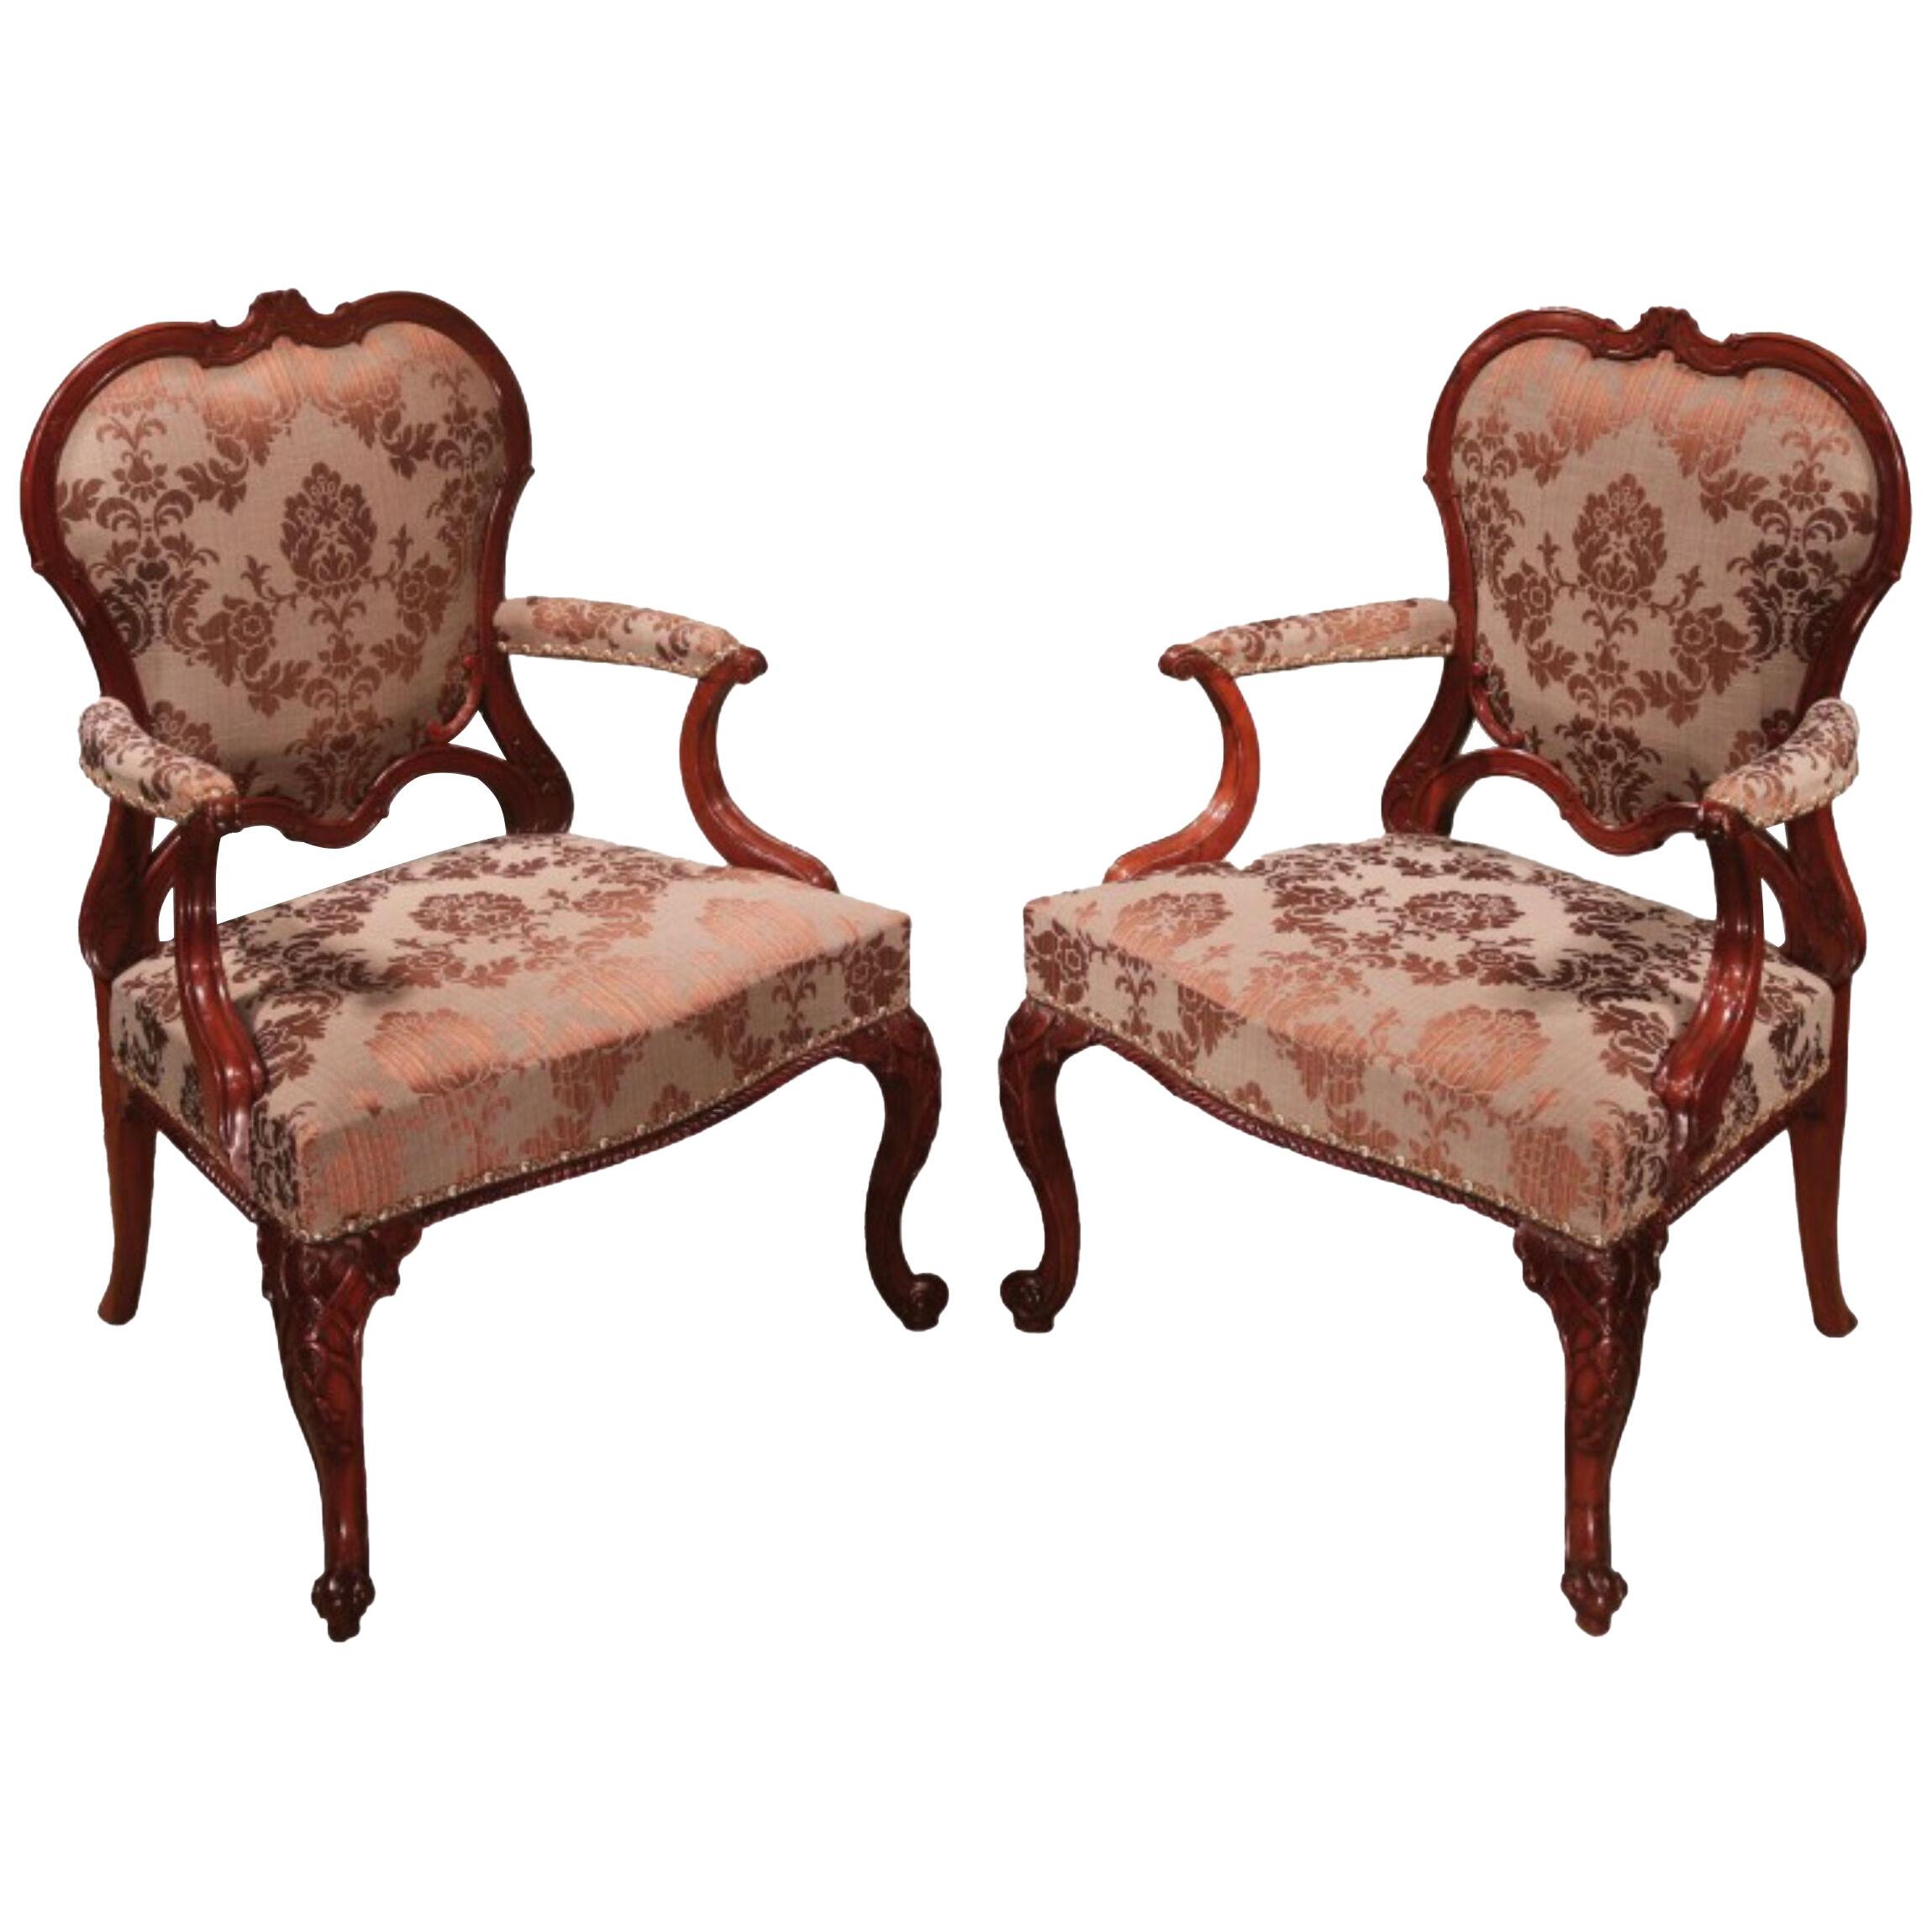 Pair of Chippendale period mahogany Library Armchairs